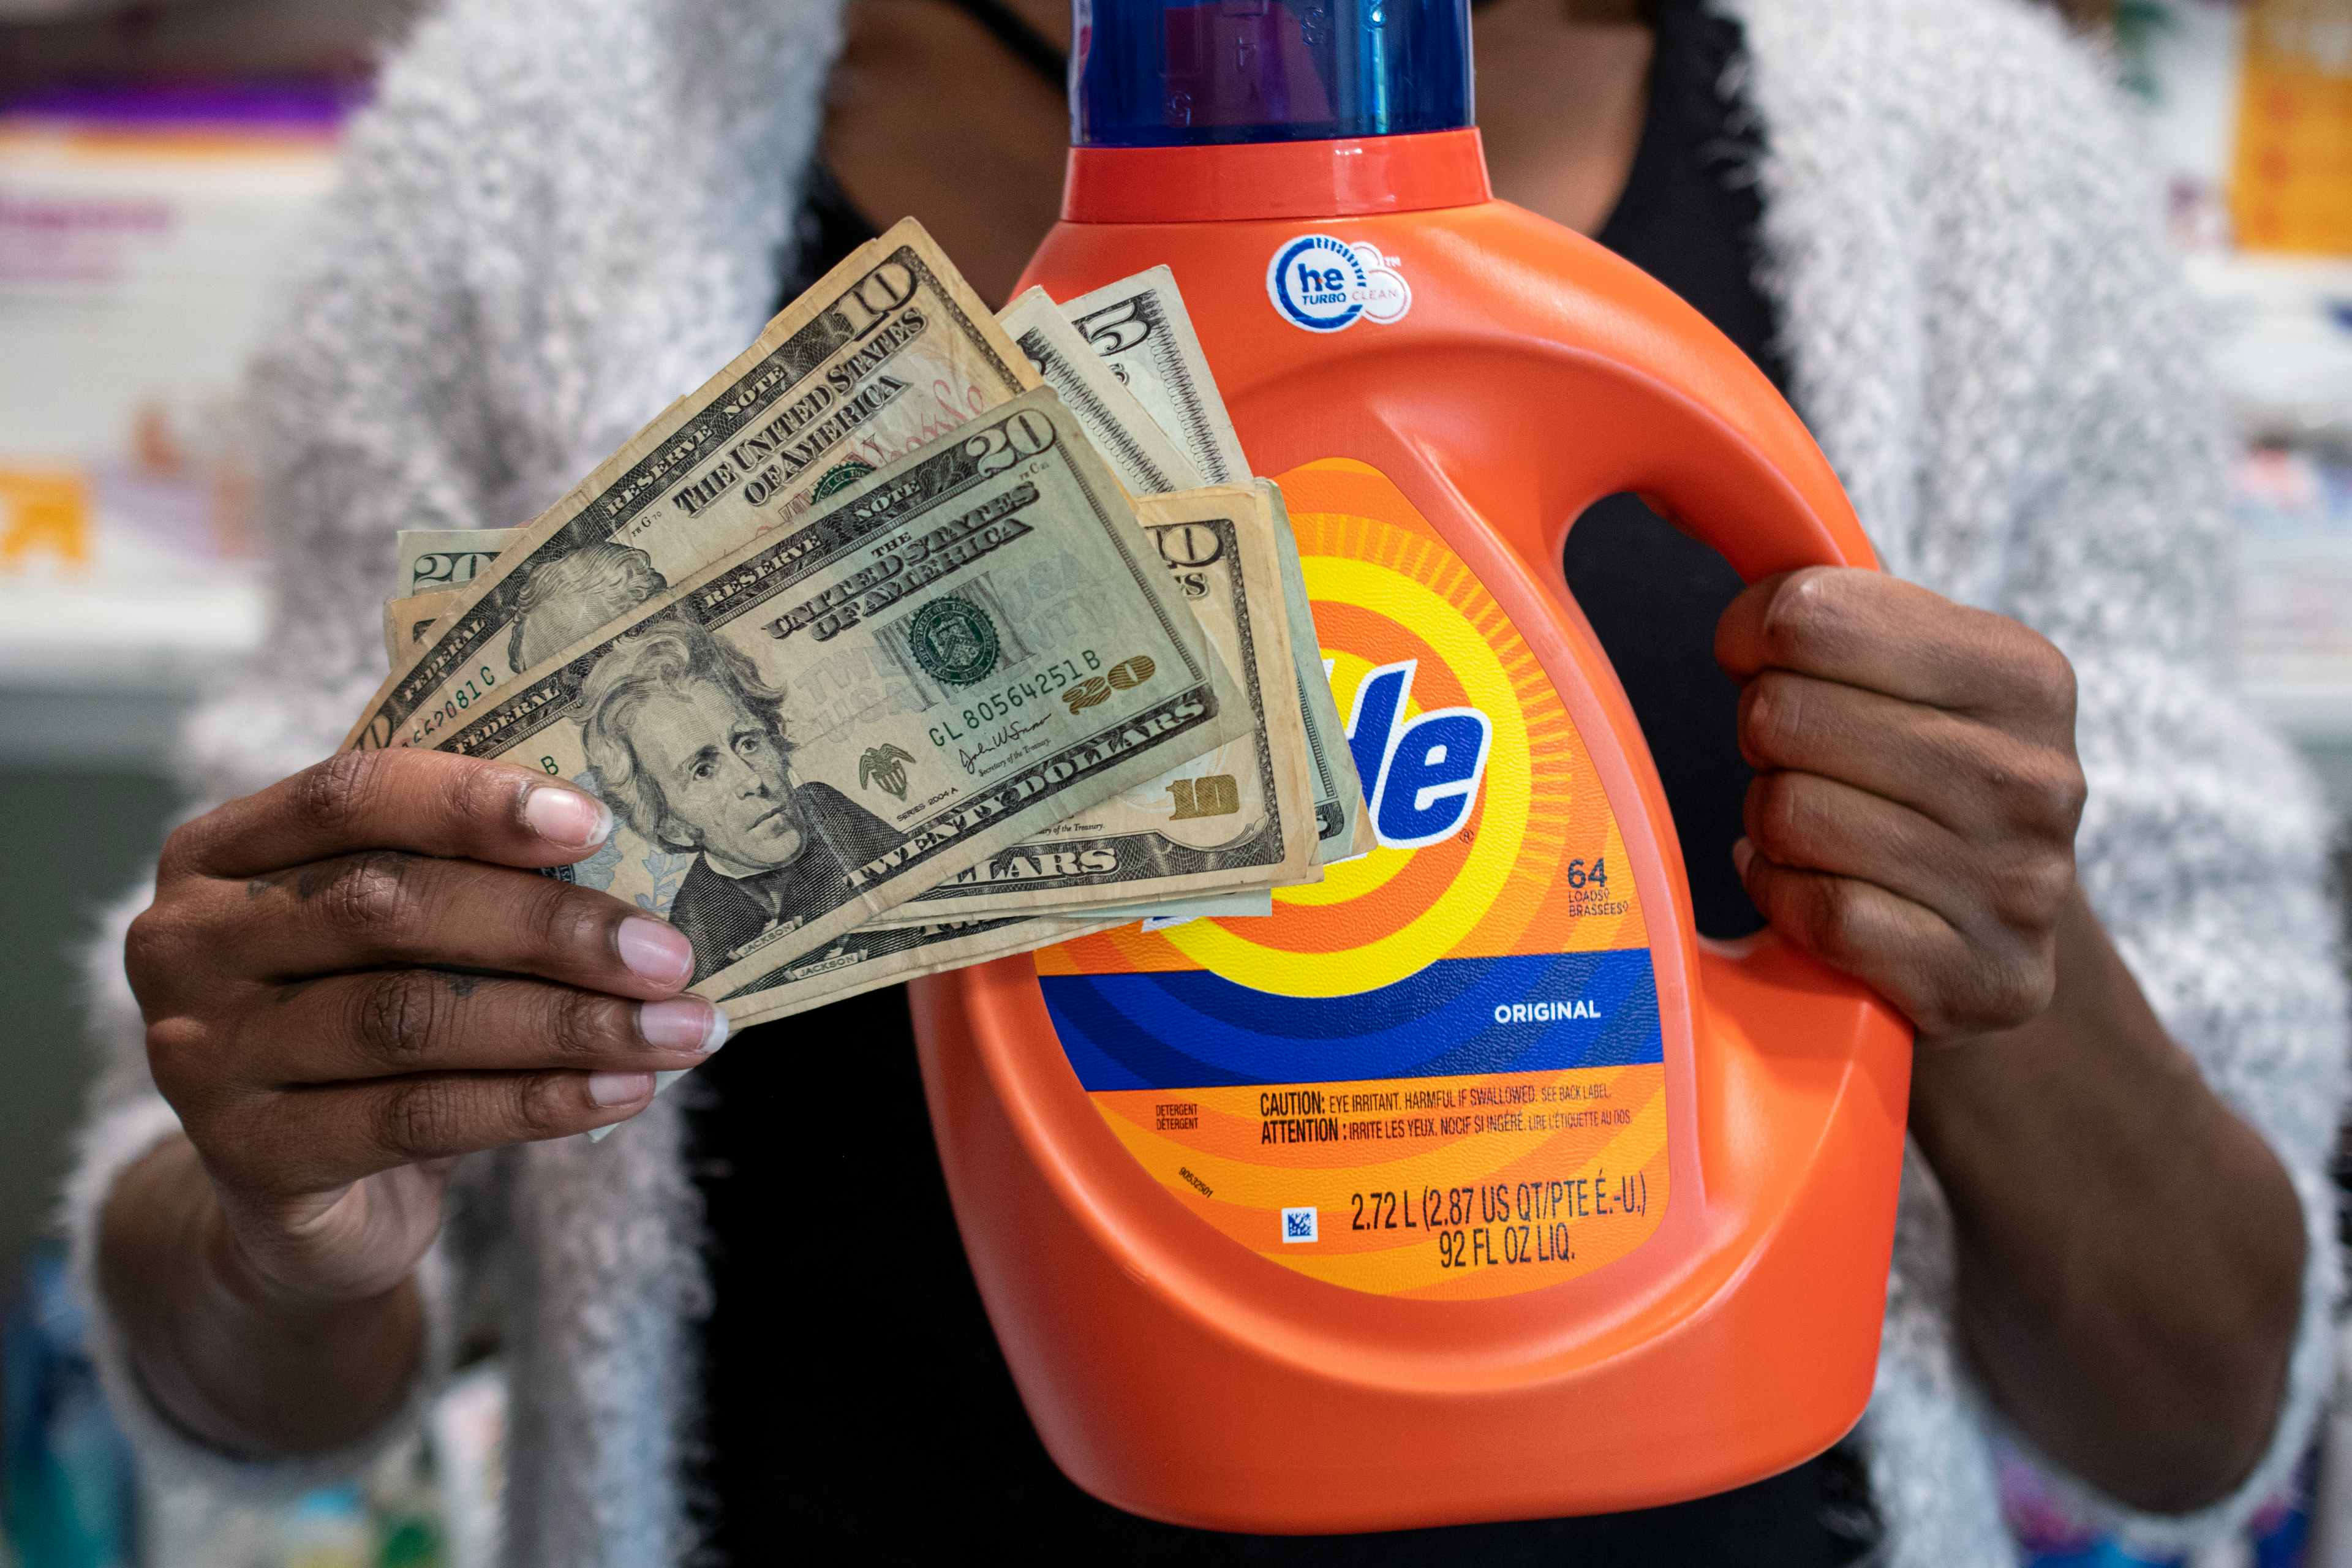 A person holding a stack of cash next to a bottle of Tide laundry detergent.